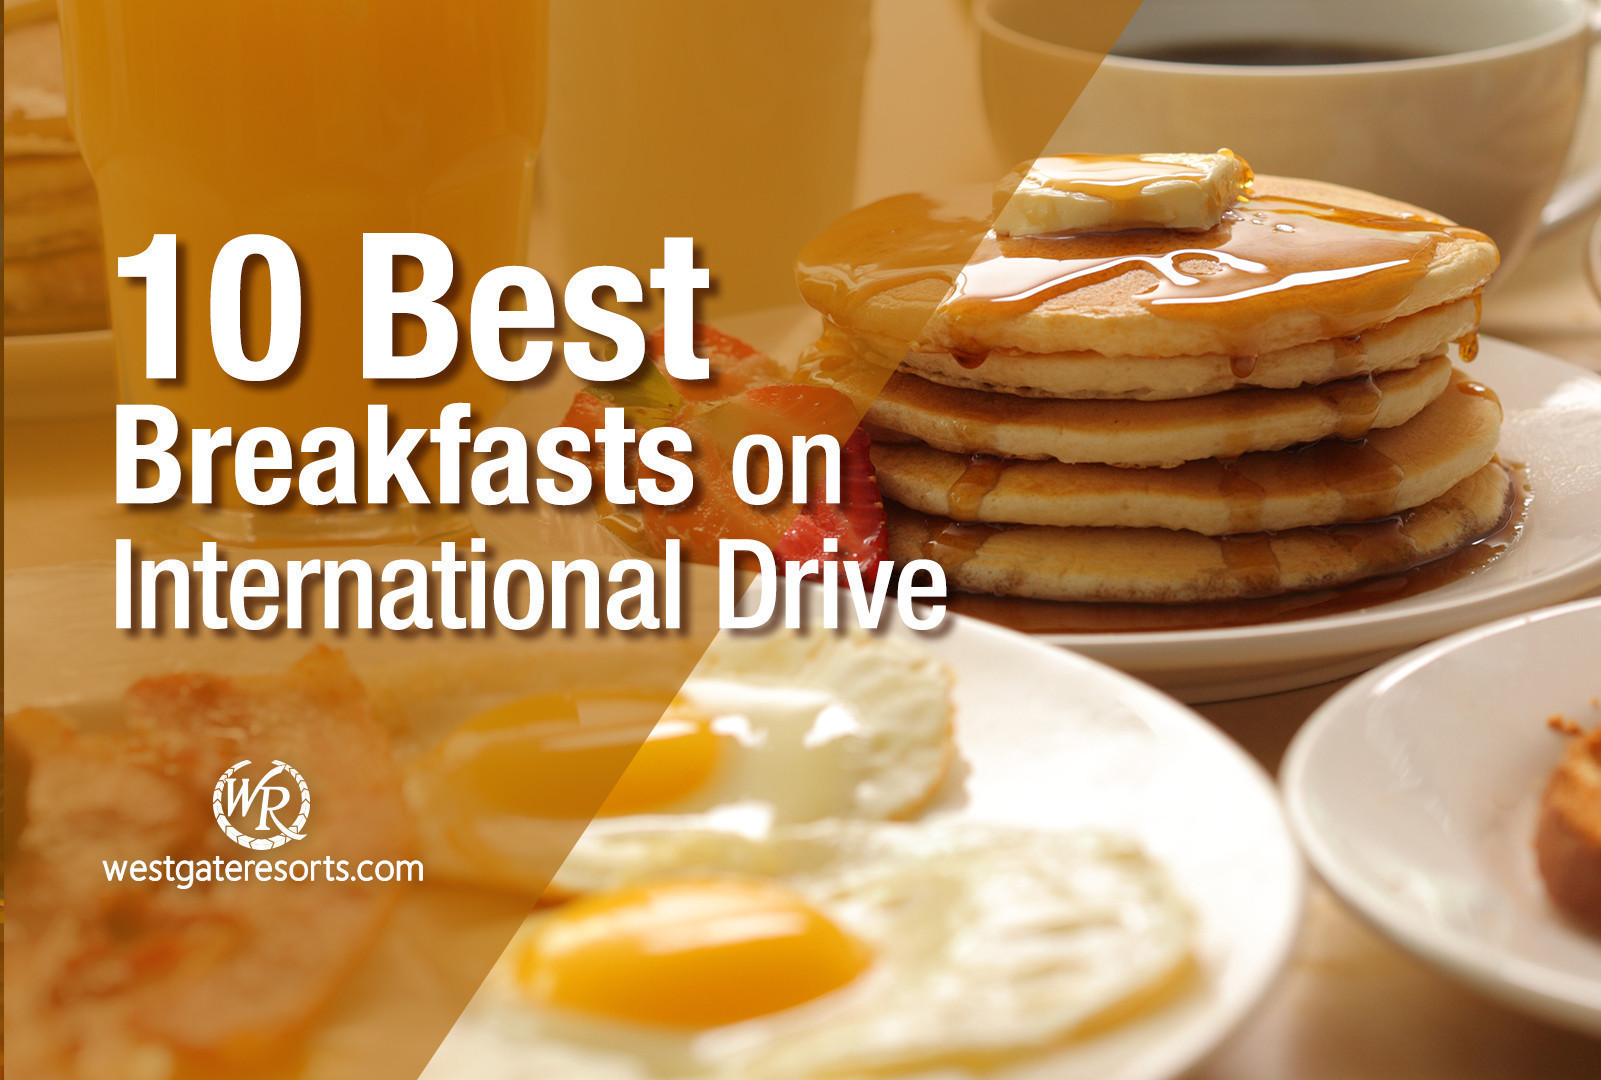 10 Best Breakfasts In Orlando On International Drive I Drive Bar Crawl Cocktail Guide